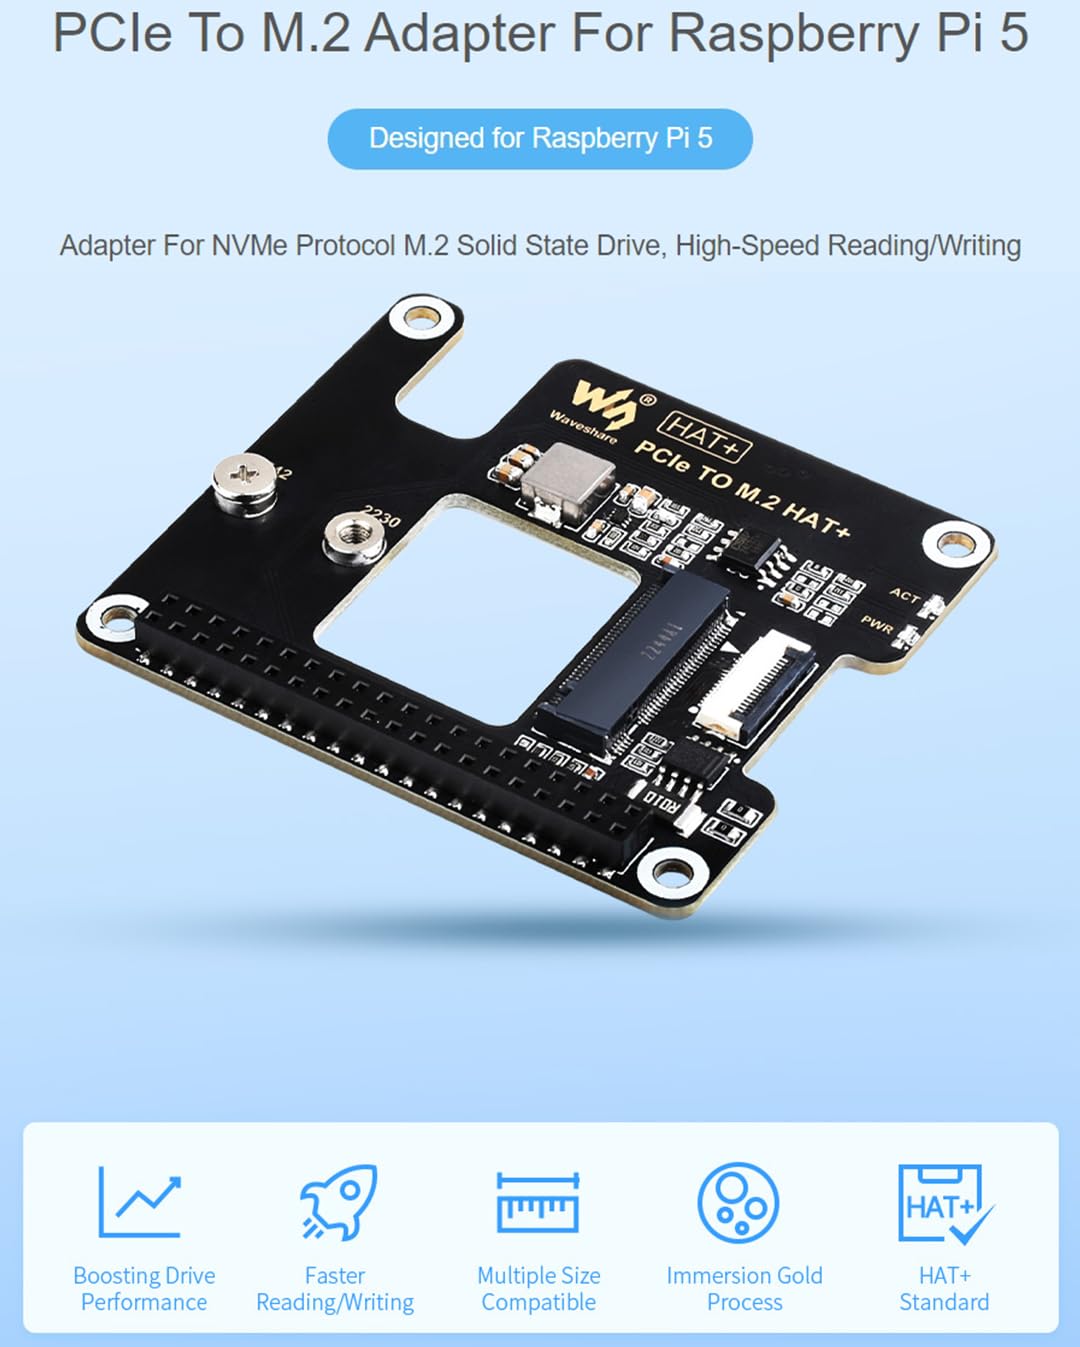 for Raspberry Pi 5 PCIe to M.2 Adapter, Supports NVMe Protocol M.2 Solid State Drive, High-Speed Reading/Writing, HAT + Standard, Compatible with M.2 Drives in 2230/2242 Size, Gen2 and Gen3 Modes